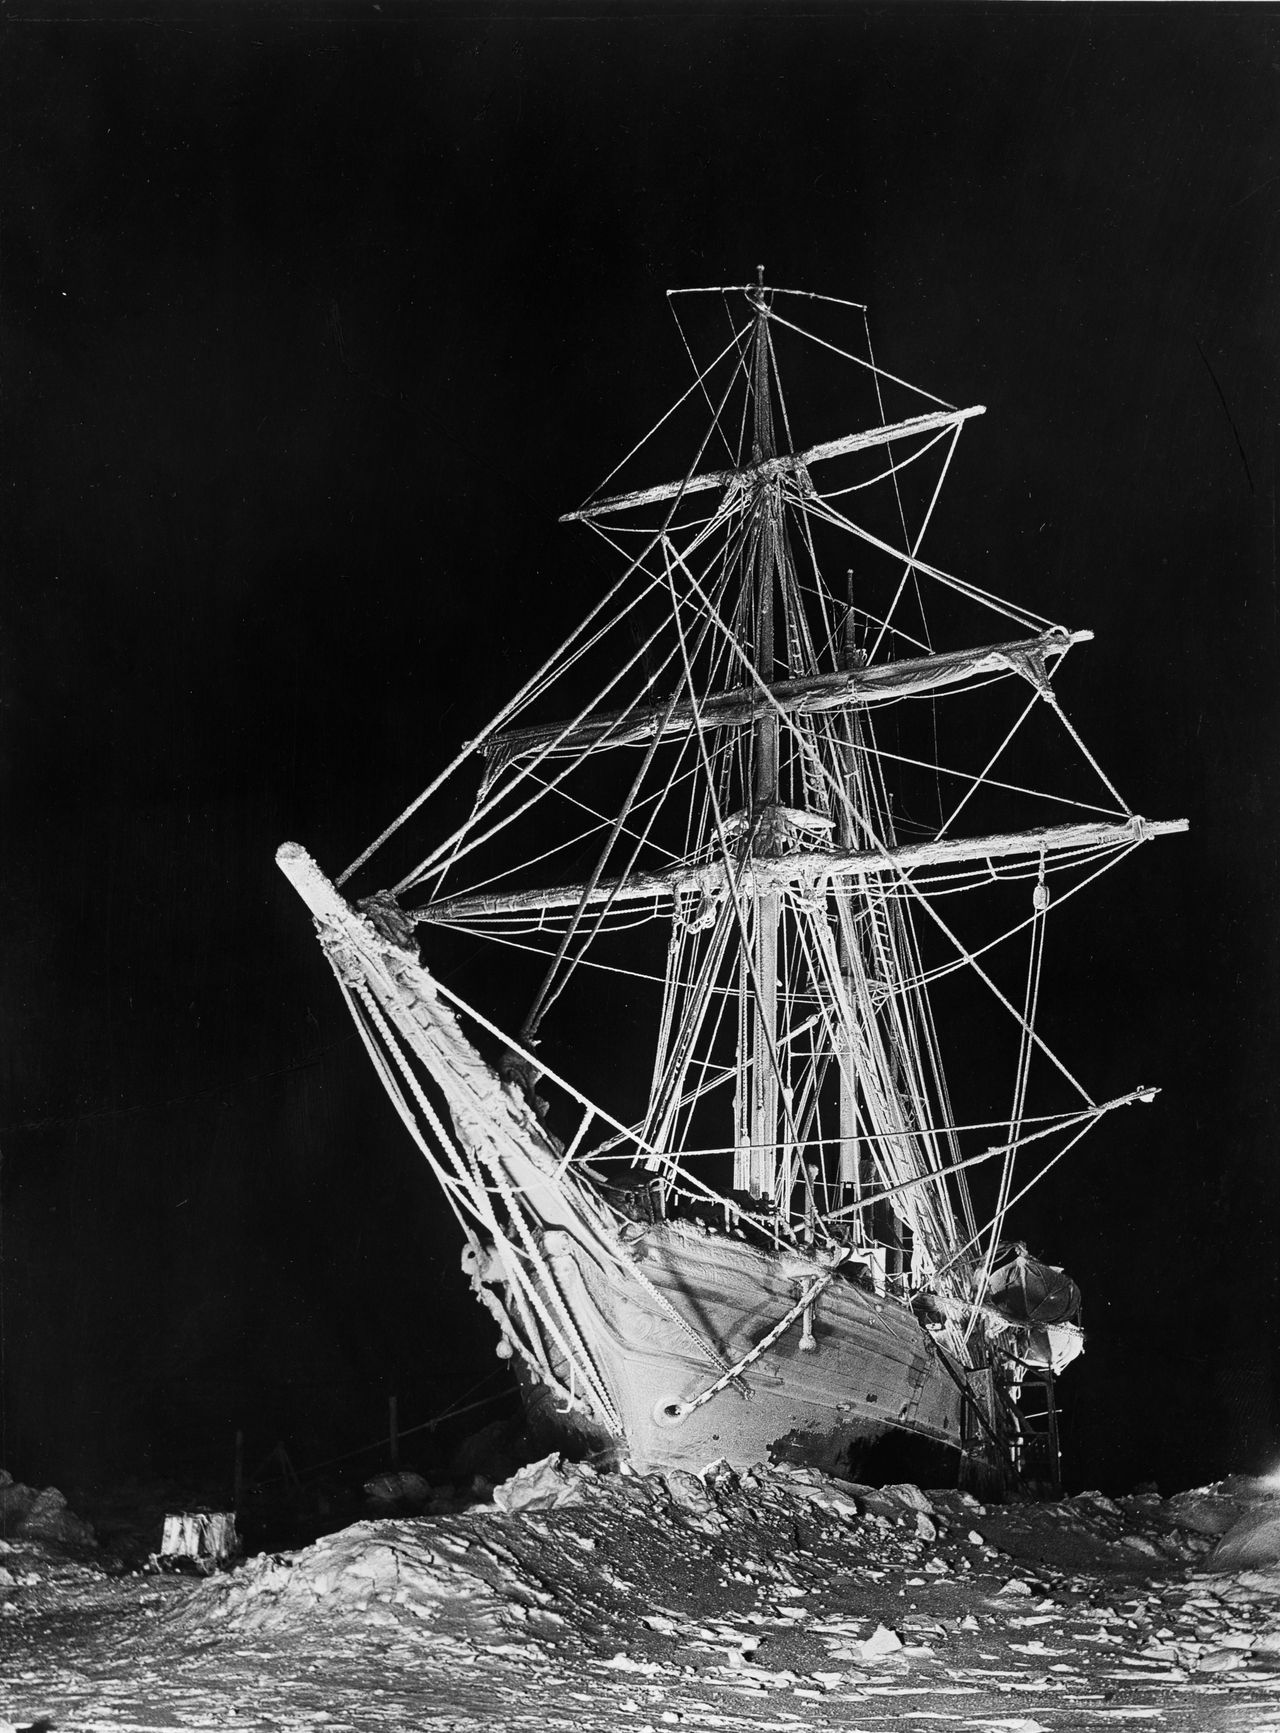 This image was taken by Hurley during the winter of 1915, using 20 flashlights to create a 'spectre ship' effect, Antarctica, 1915.